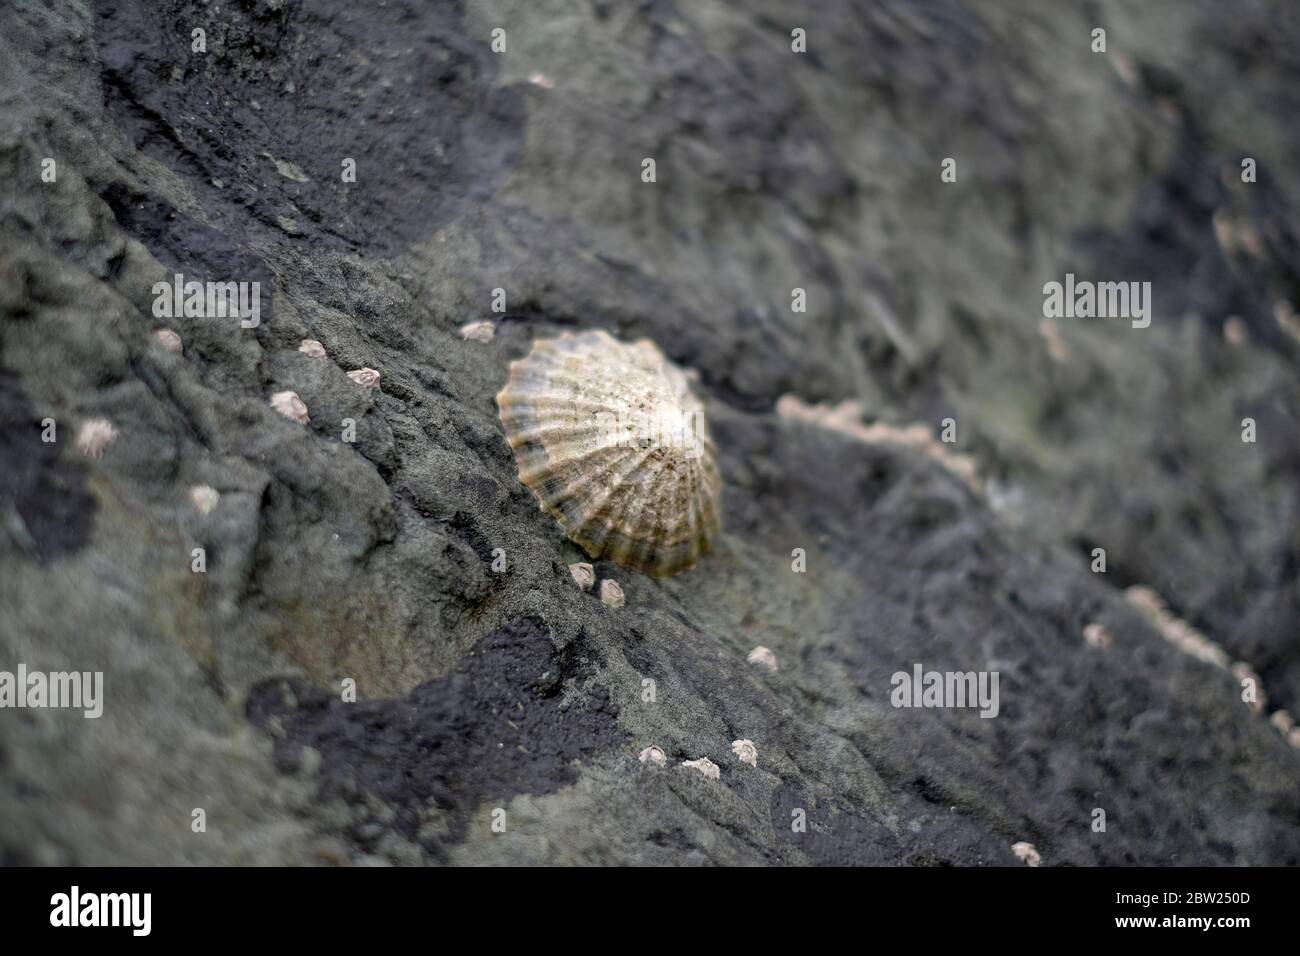 Limpet on rock, Wales Stock Photo